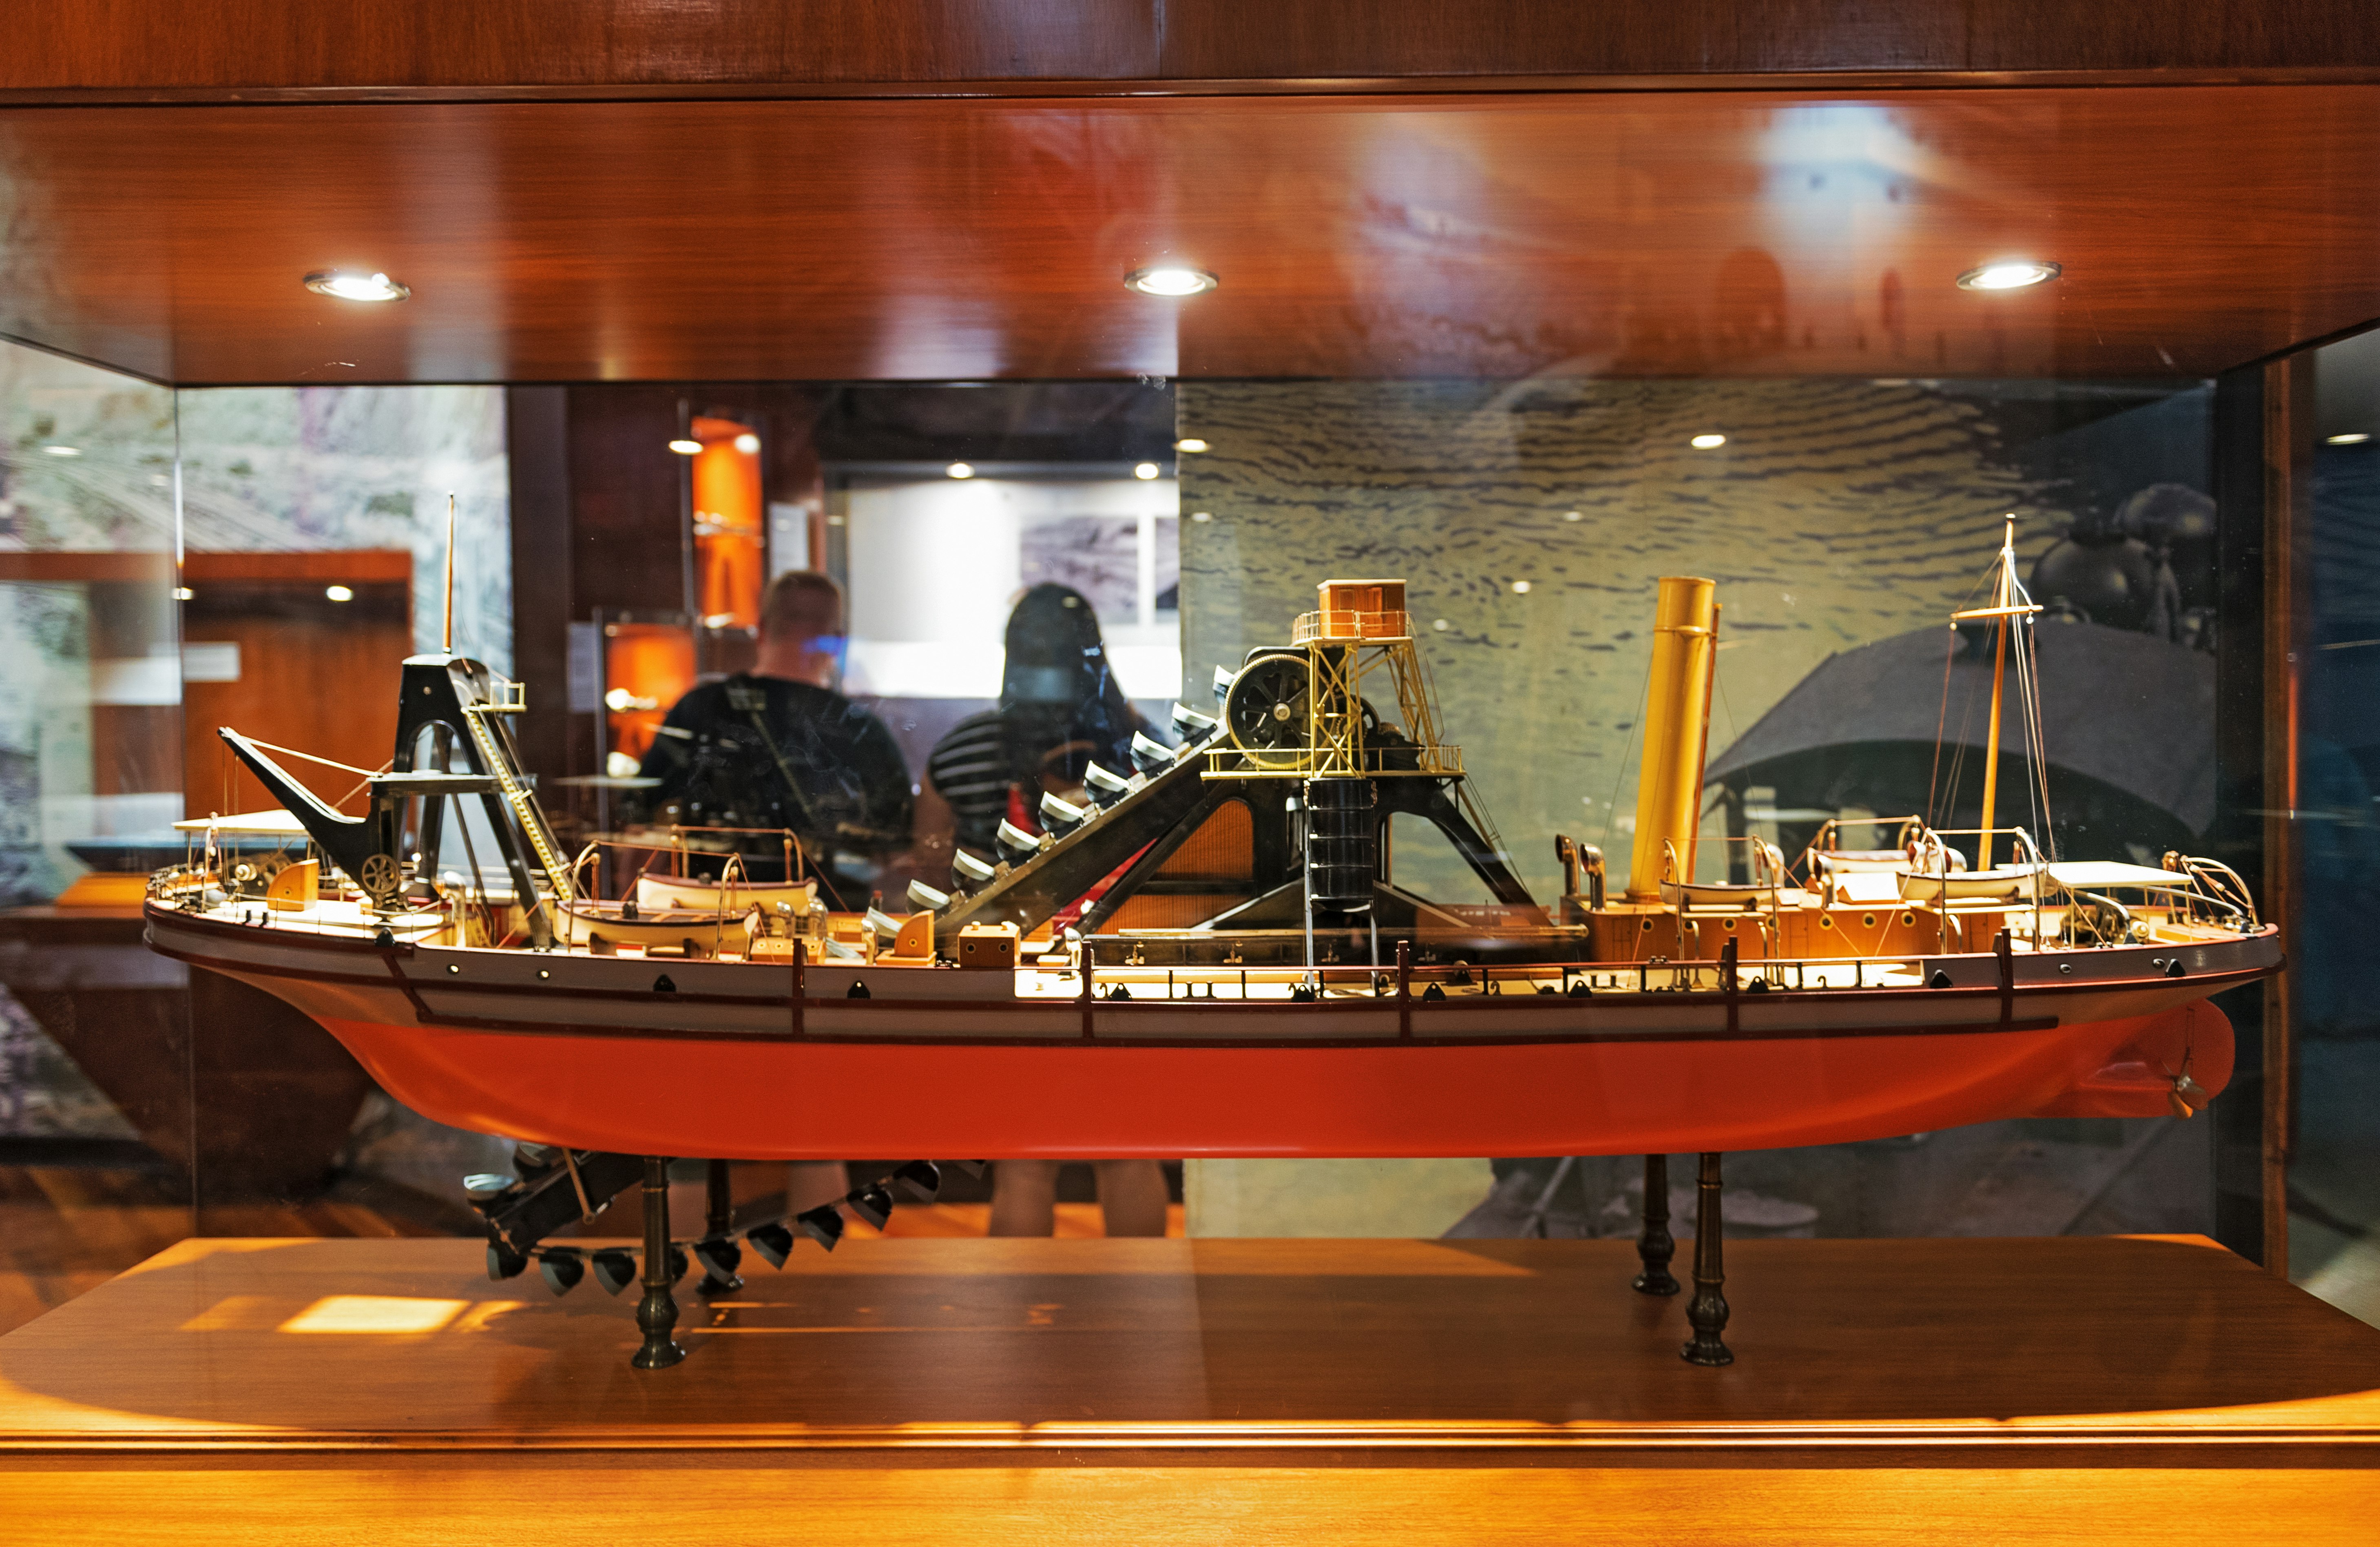 A model of a dredging boat on display in the Museo del Canal Interoceánico de Panamá 